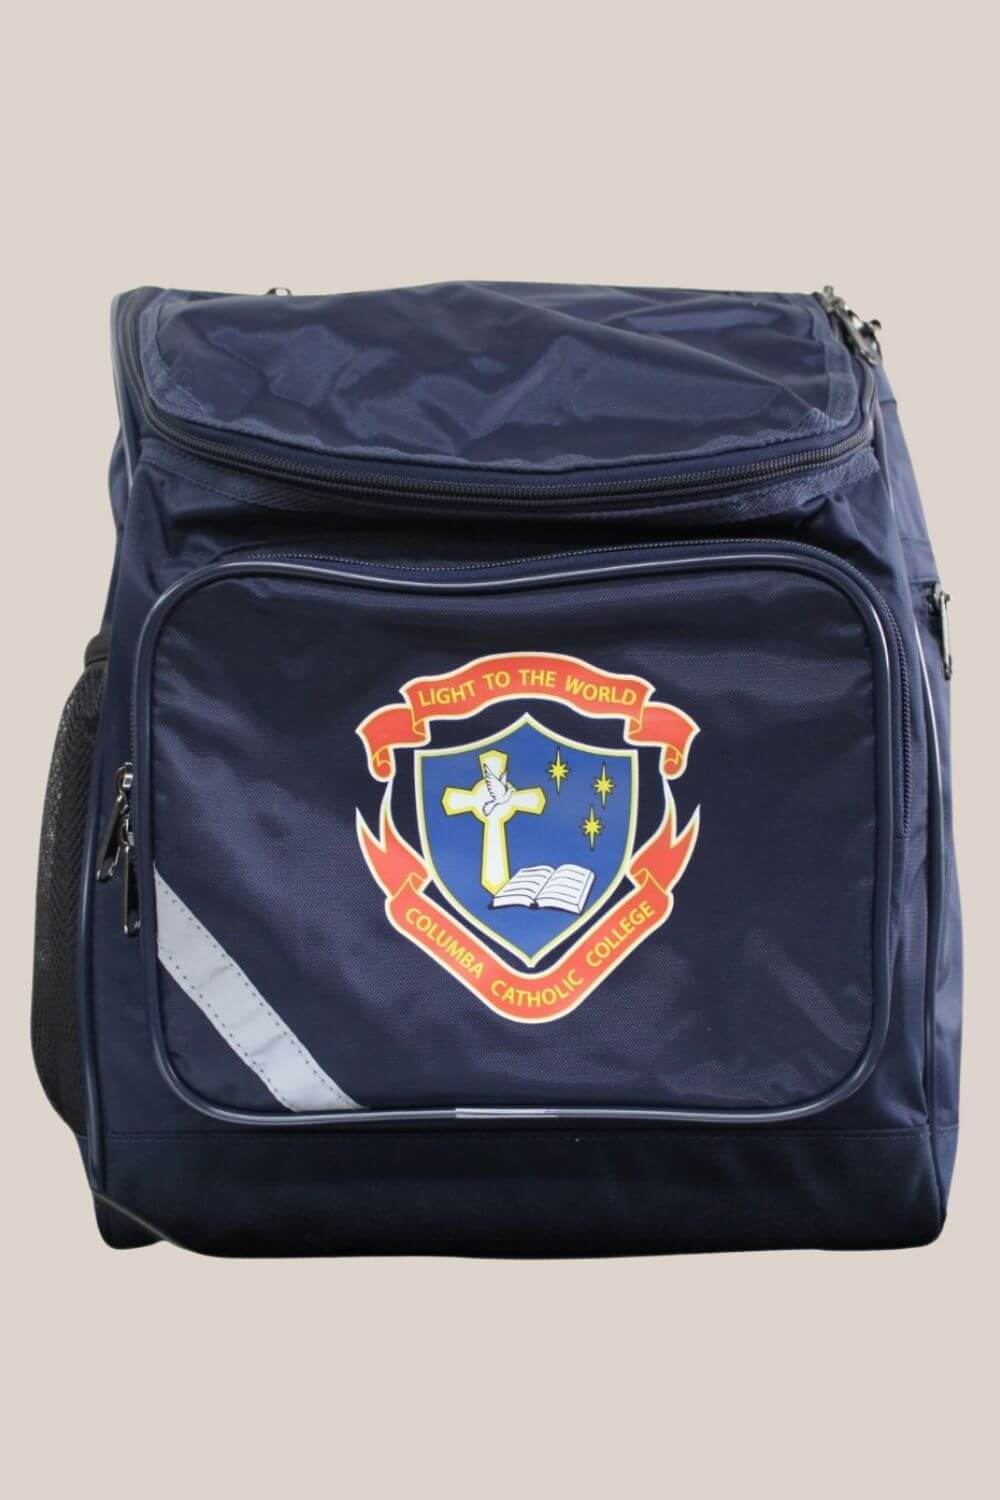 CCC Primary Back Pack